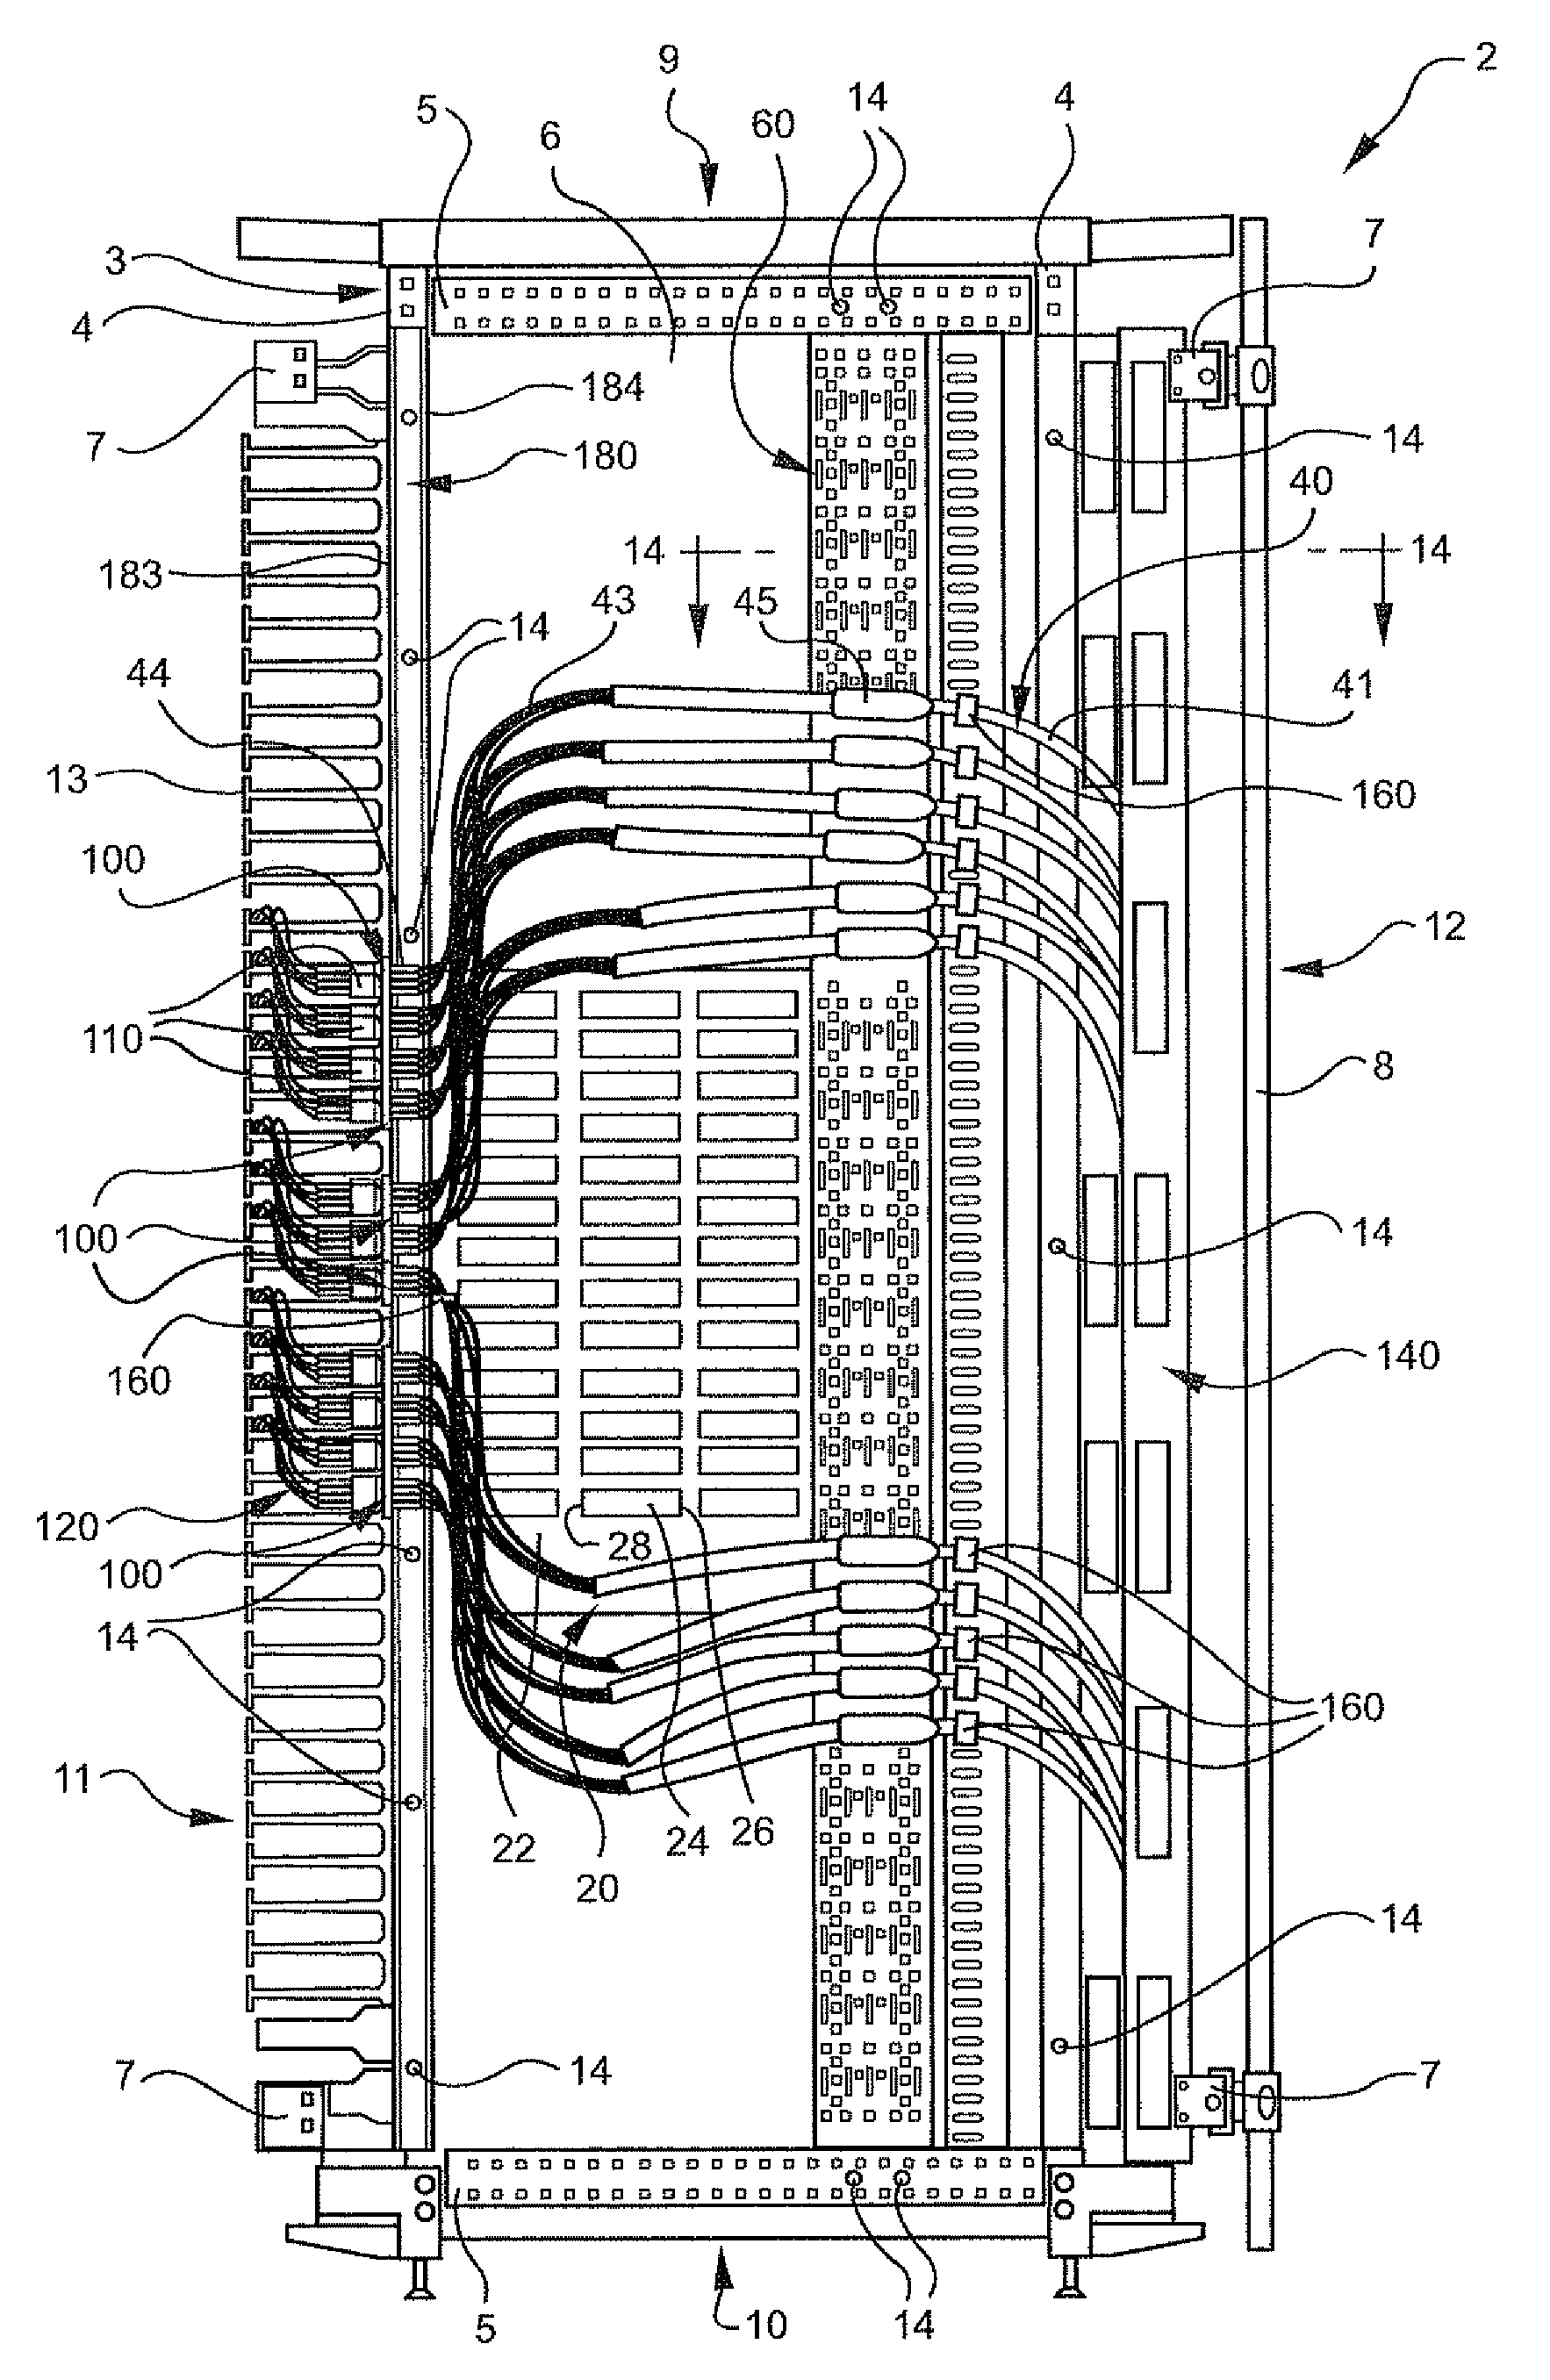 Apparatus and method for organizing cables in a cabinet